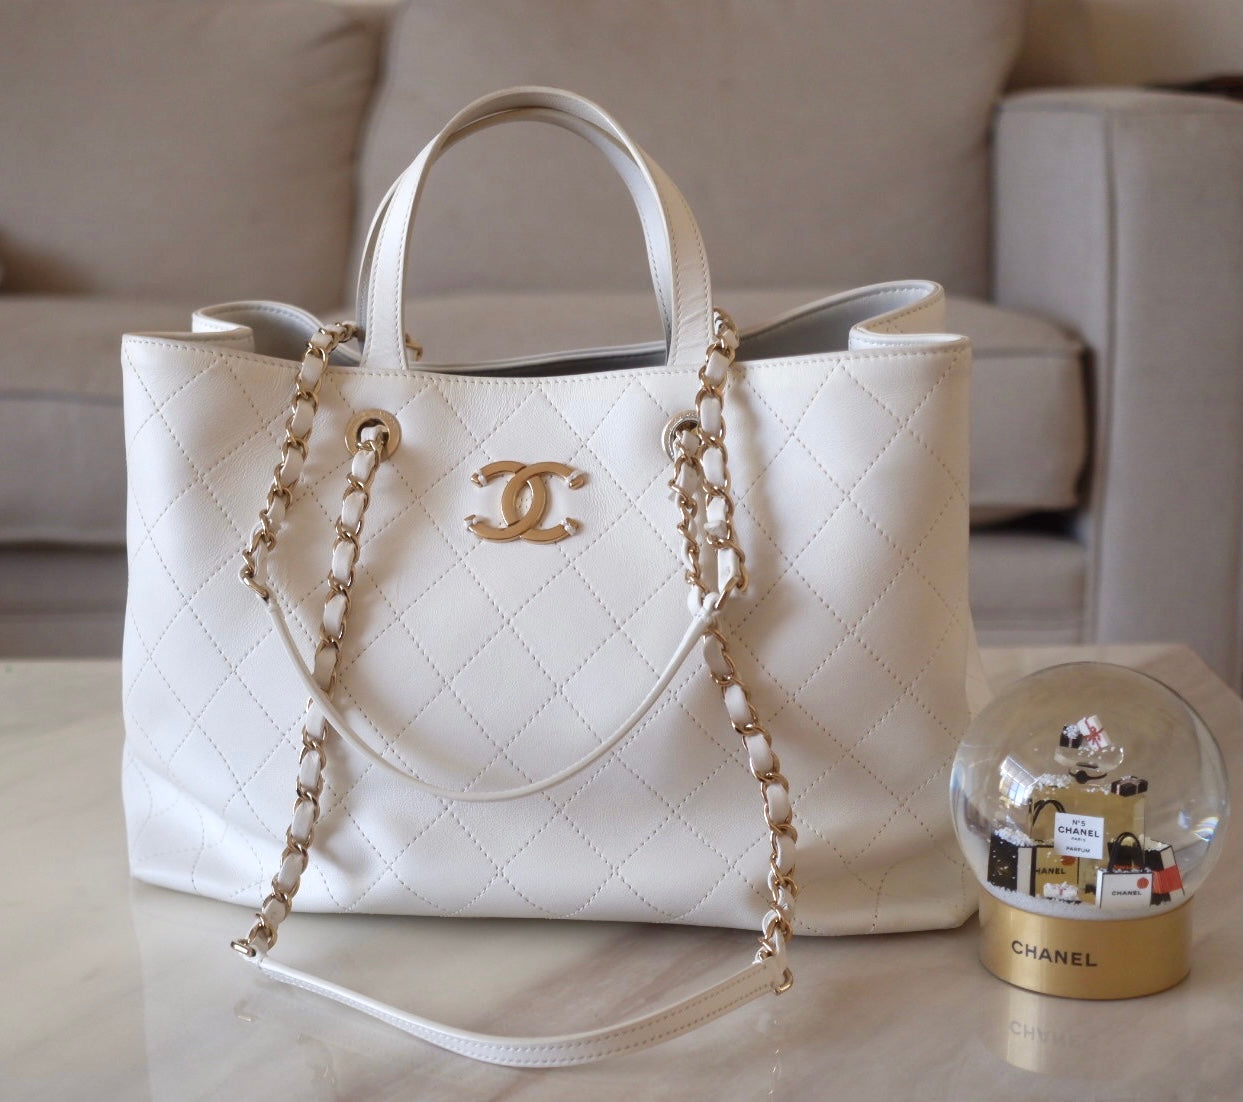 Chanel shopping bag White and black Gift bag Wrapping Fashion accessories  Lady